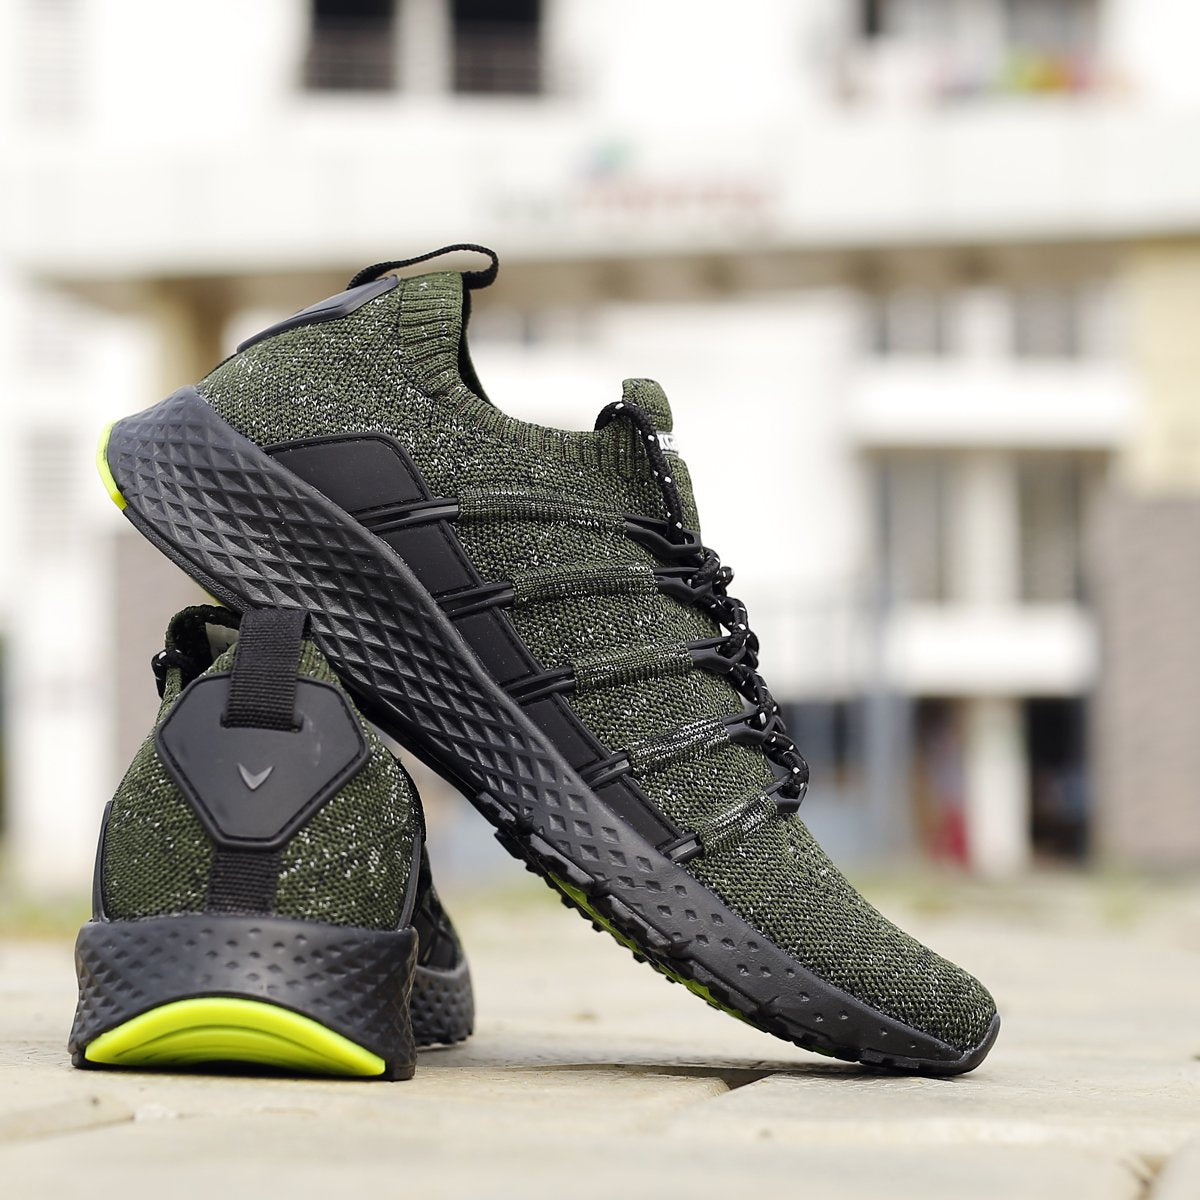 Bacca Bucci STELLA Running Shoes with Adaptive Smart Cushioning 5 in 1 Uni-Moulding Technology - Bacca Bucci